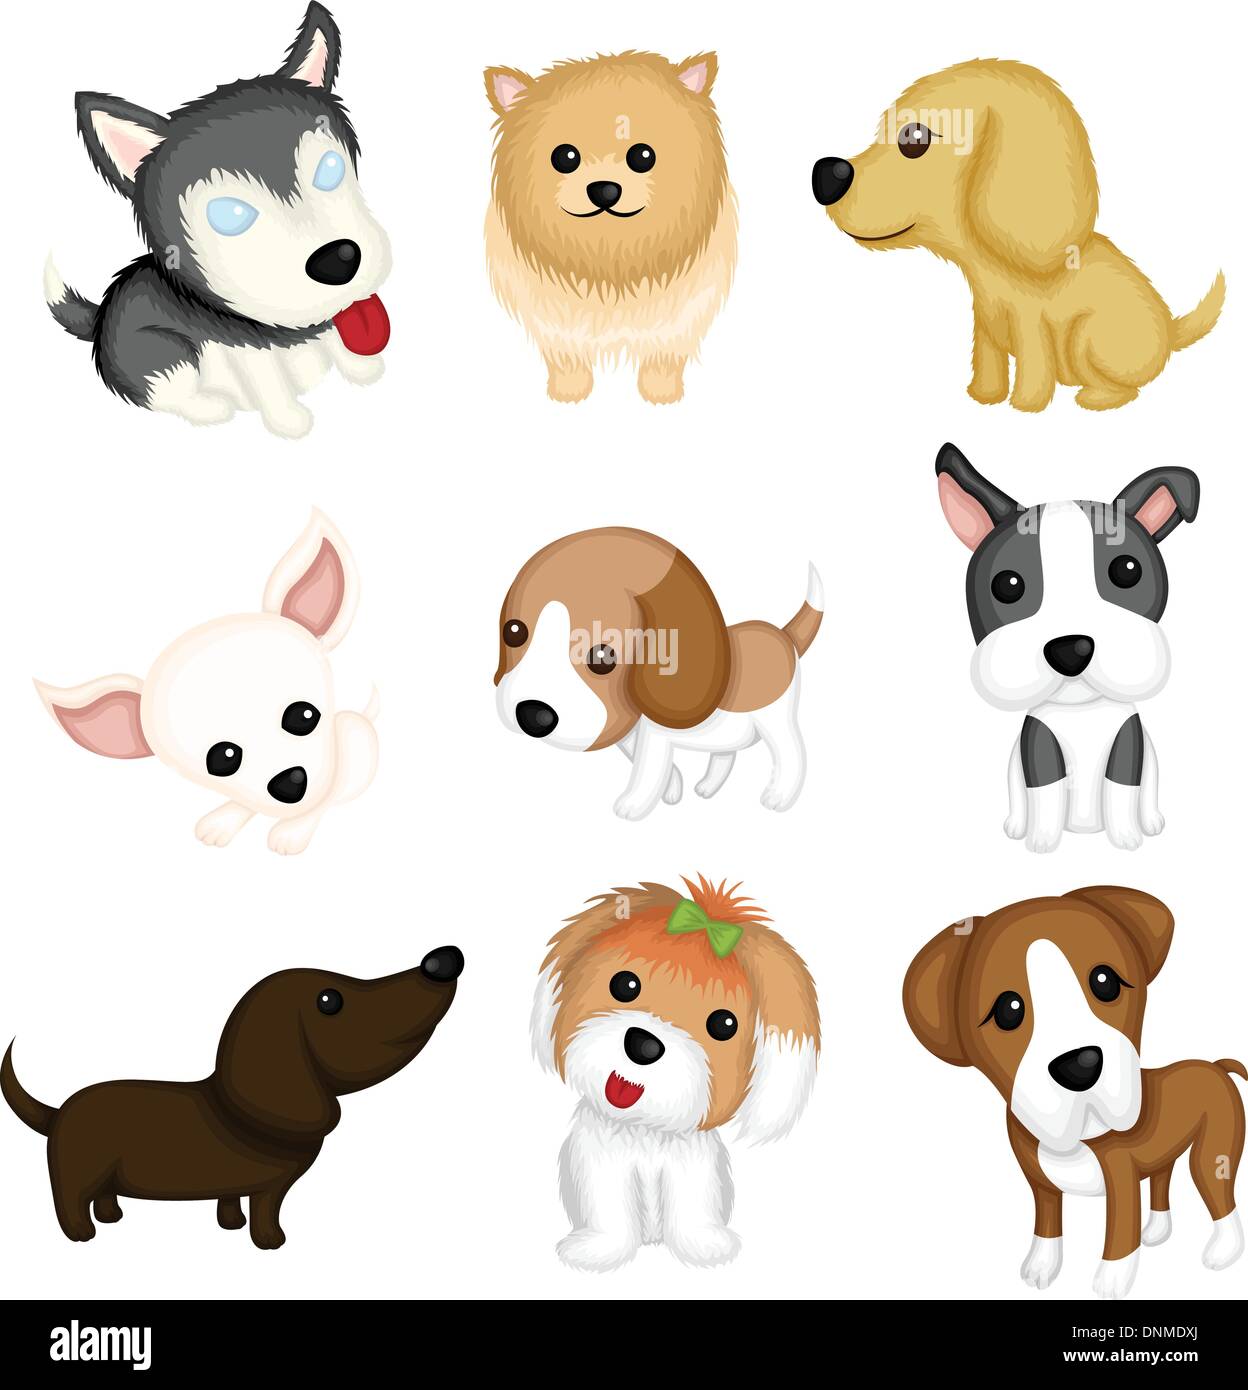 A vector illustration of different dog breeds Stock Vector